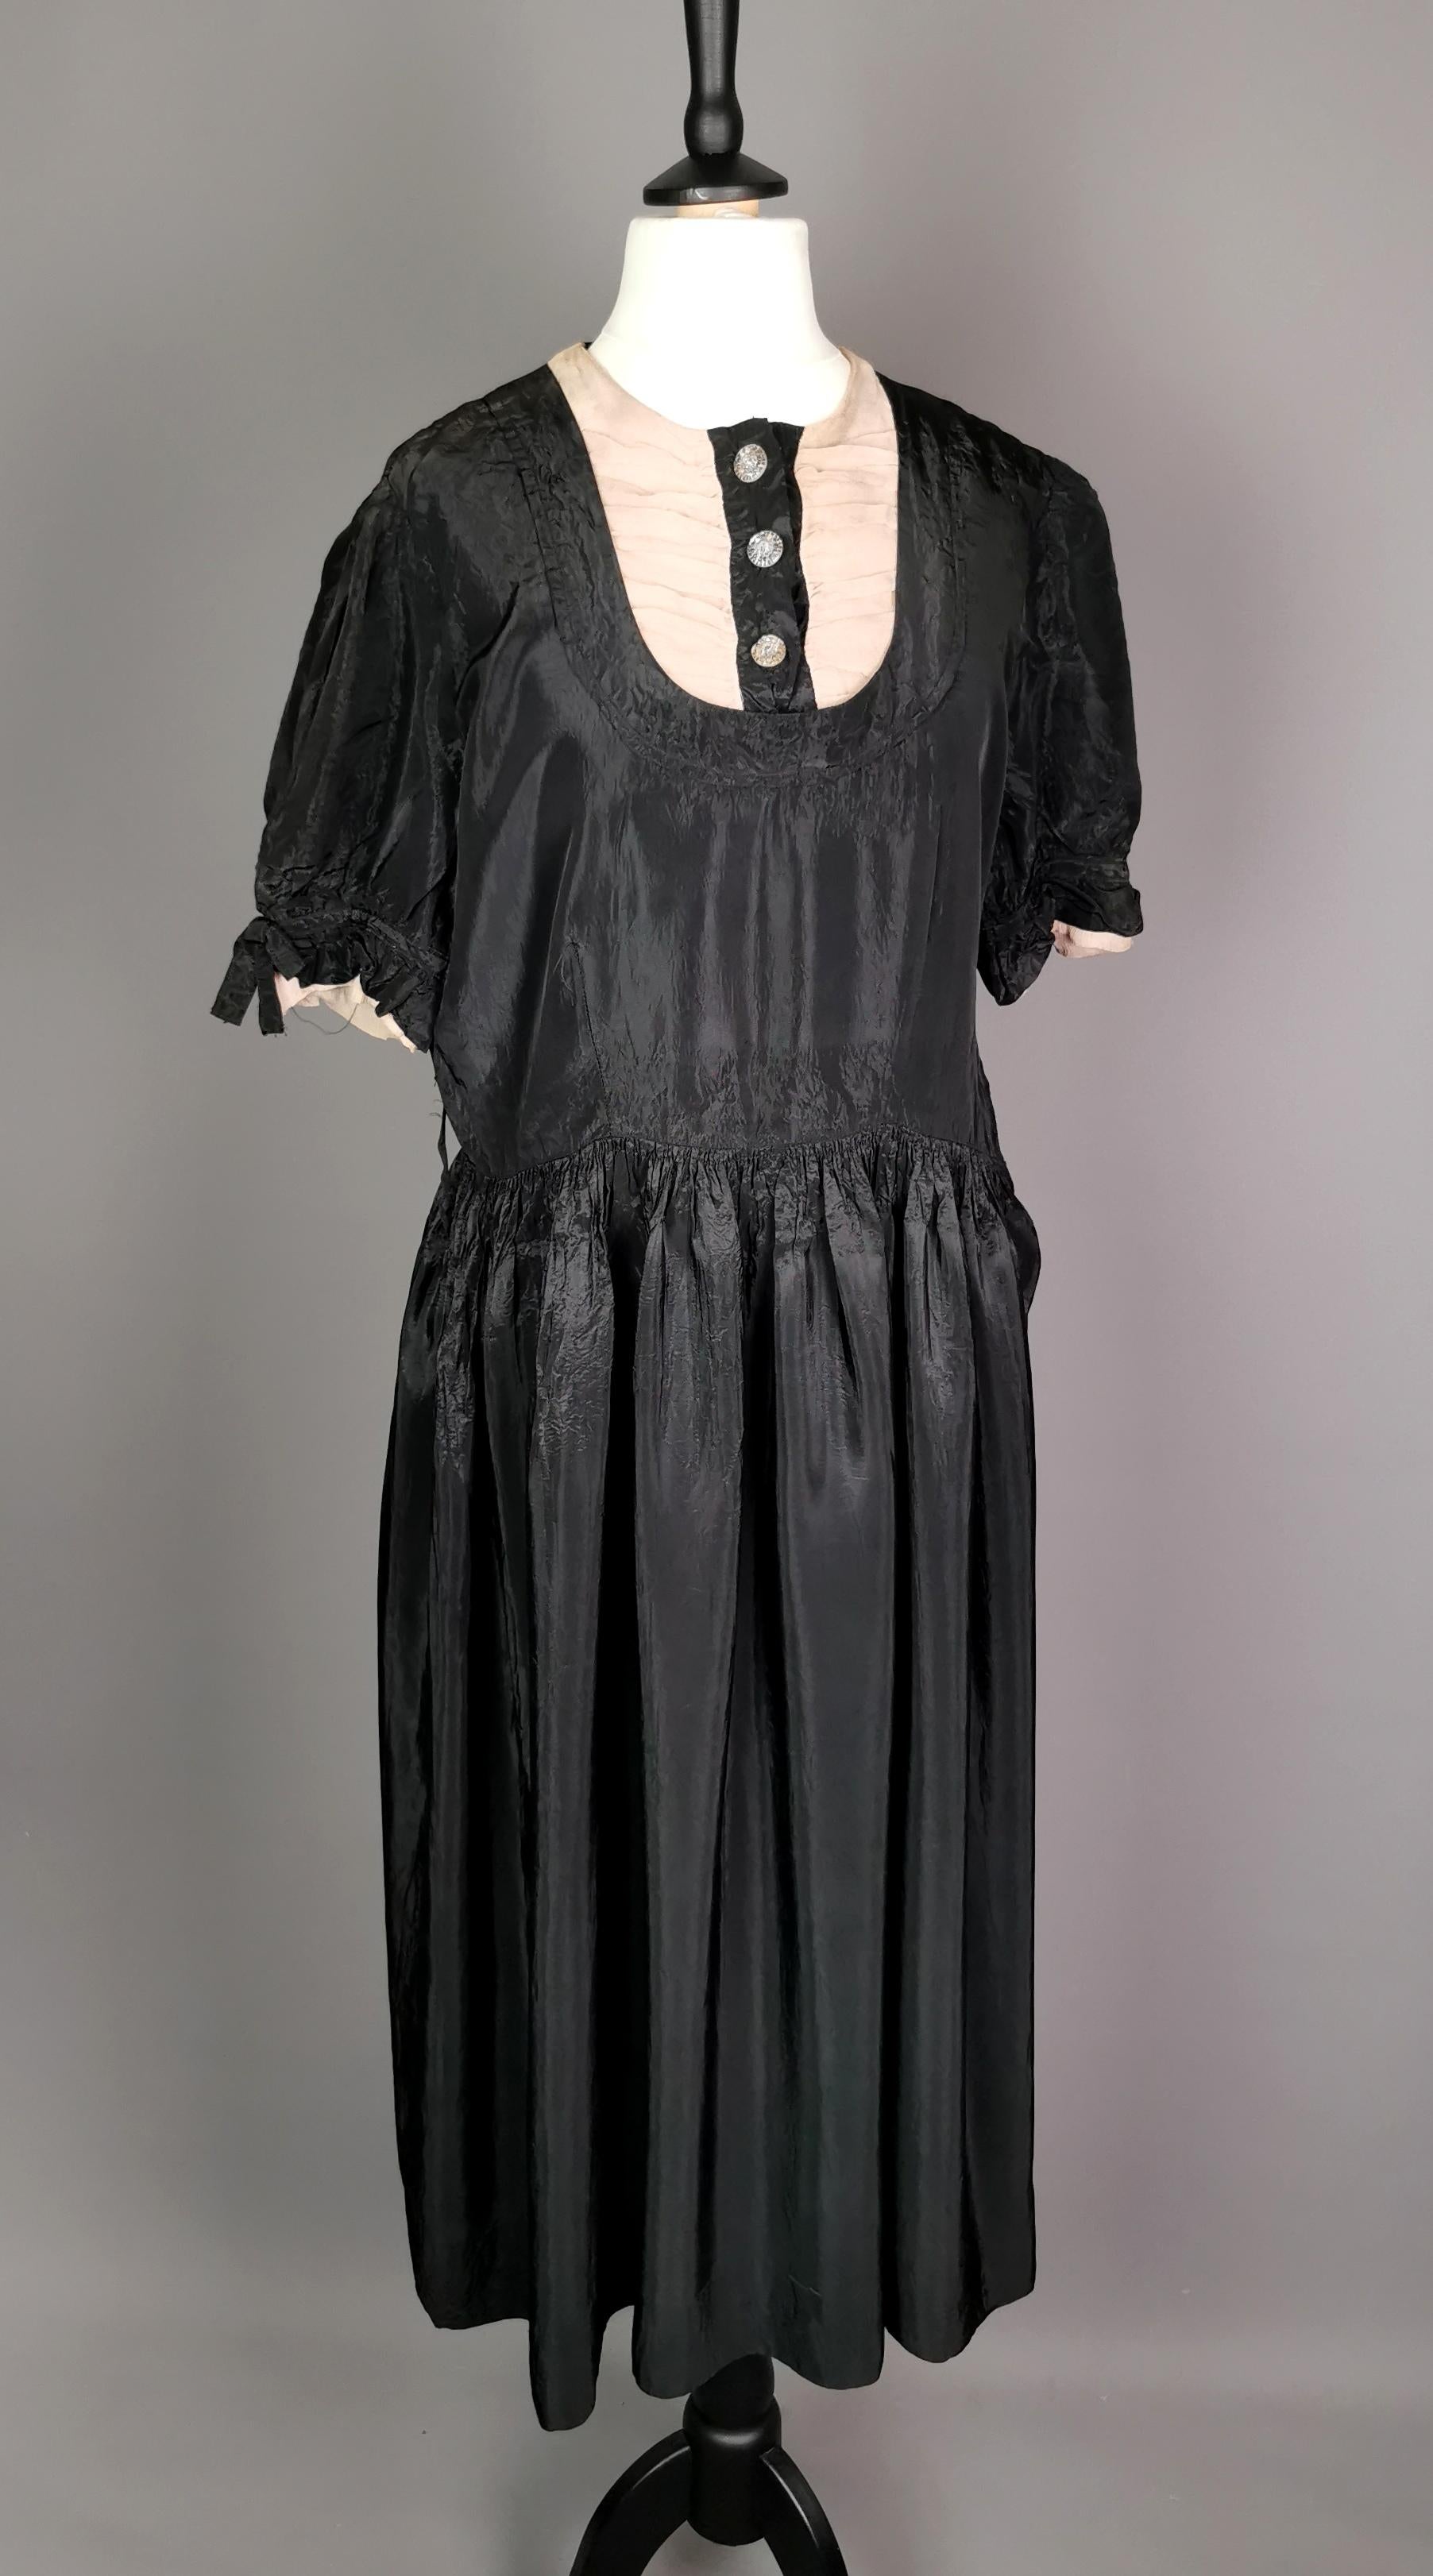 A gorgeous rare vintage late 1920's Black taffeta dress by Faytex.

This is a beautiful vintage dress, made in rich inky black taffeta, it has a slightly dropped waist, pulled in.

It has pretty puffball type sleeves with short ties and a little